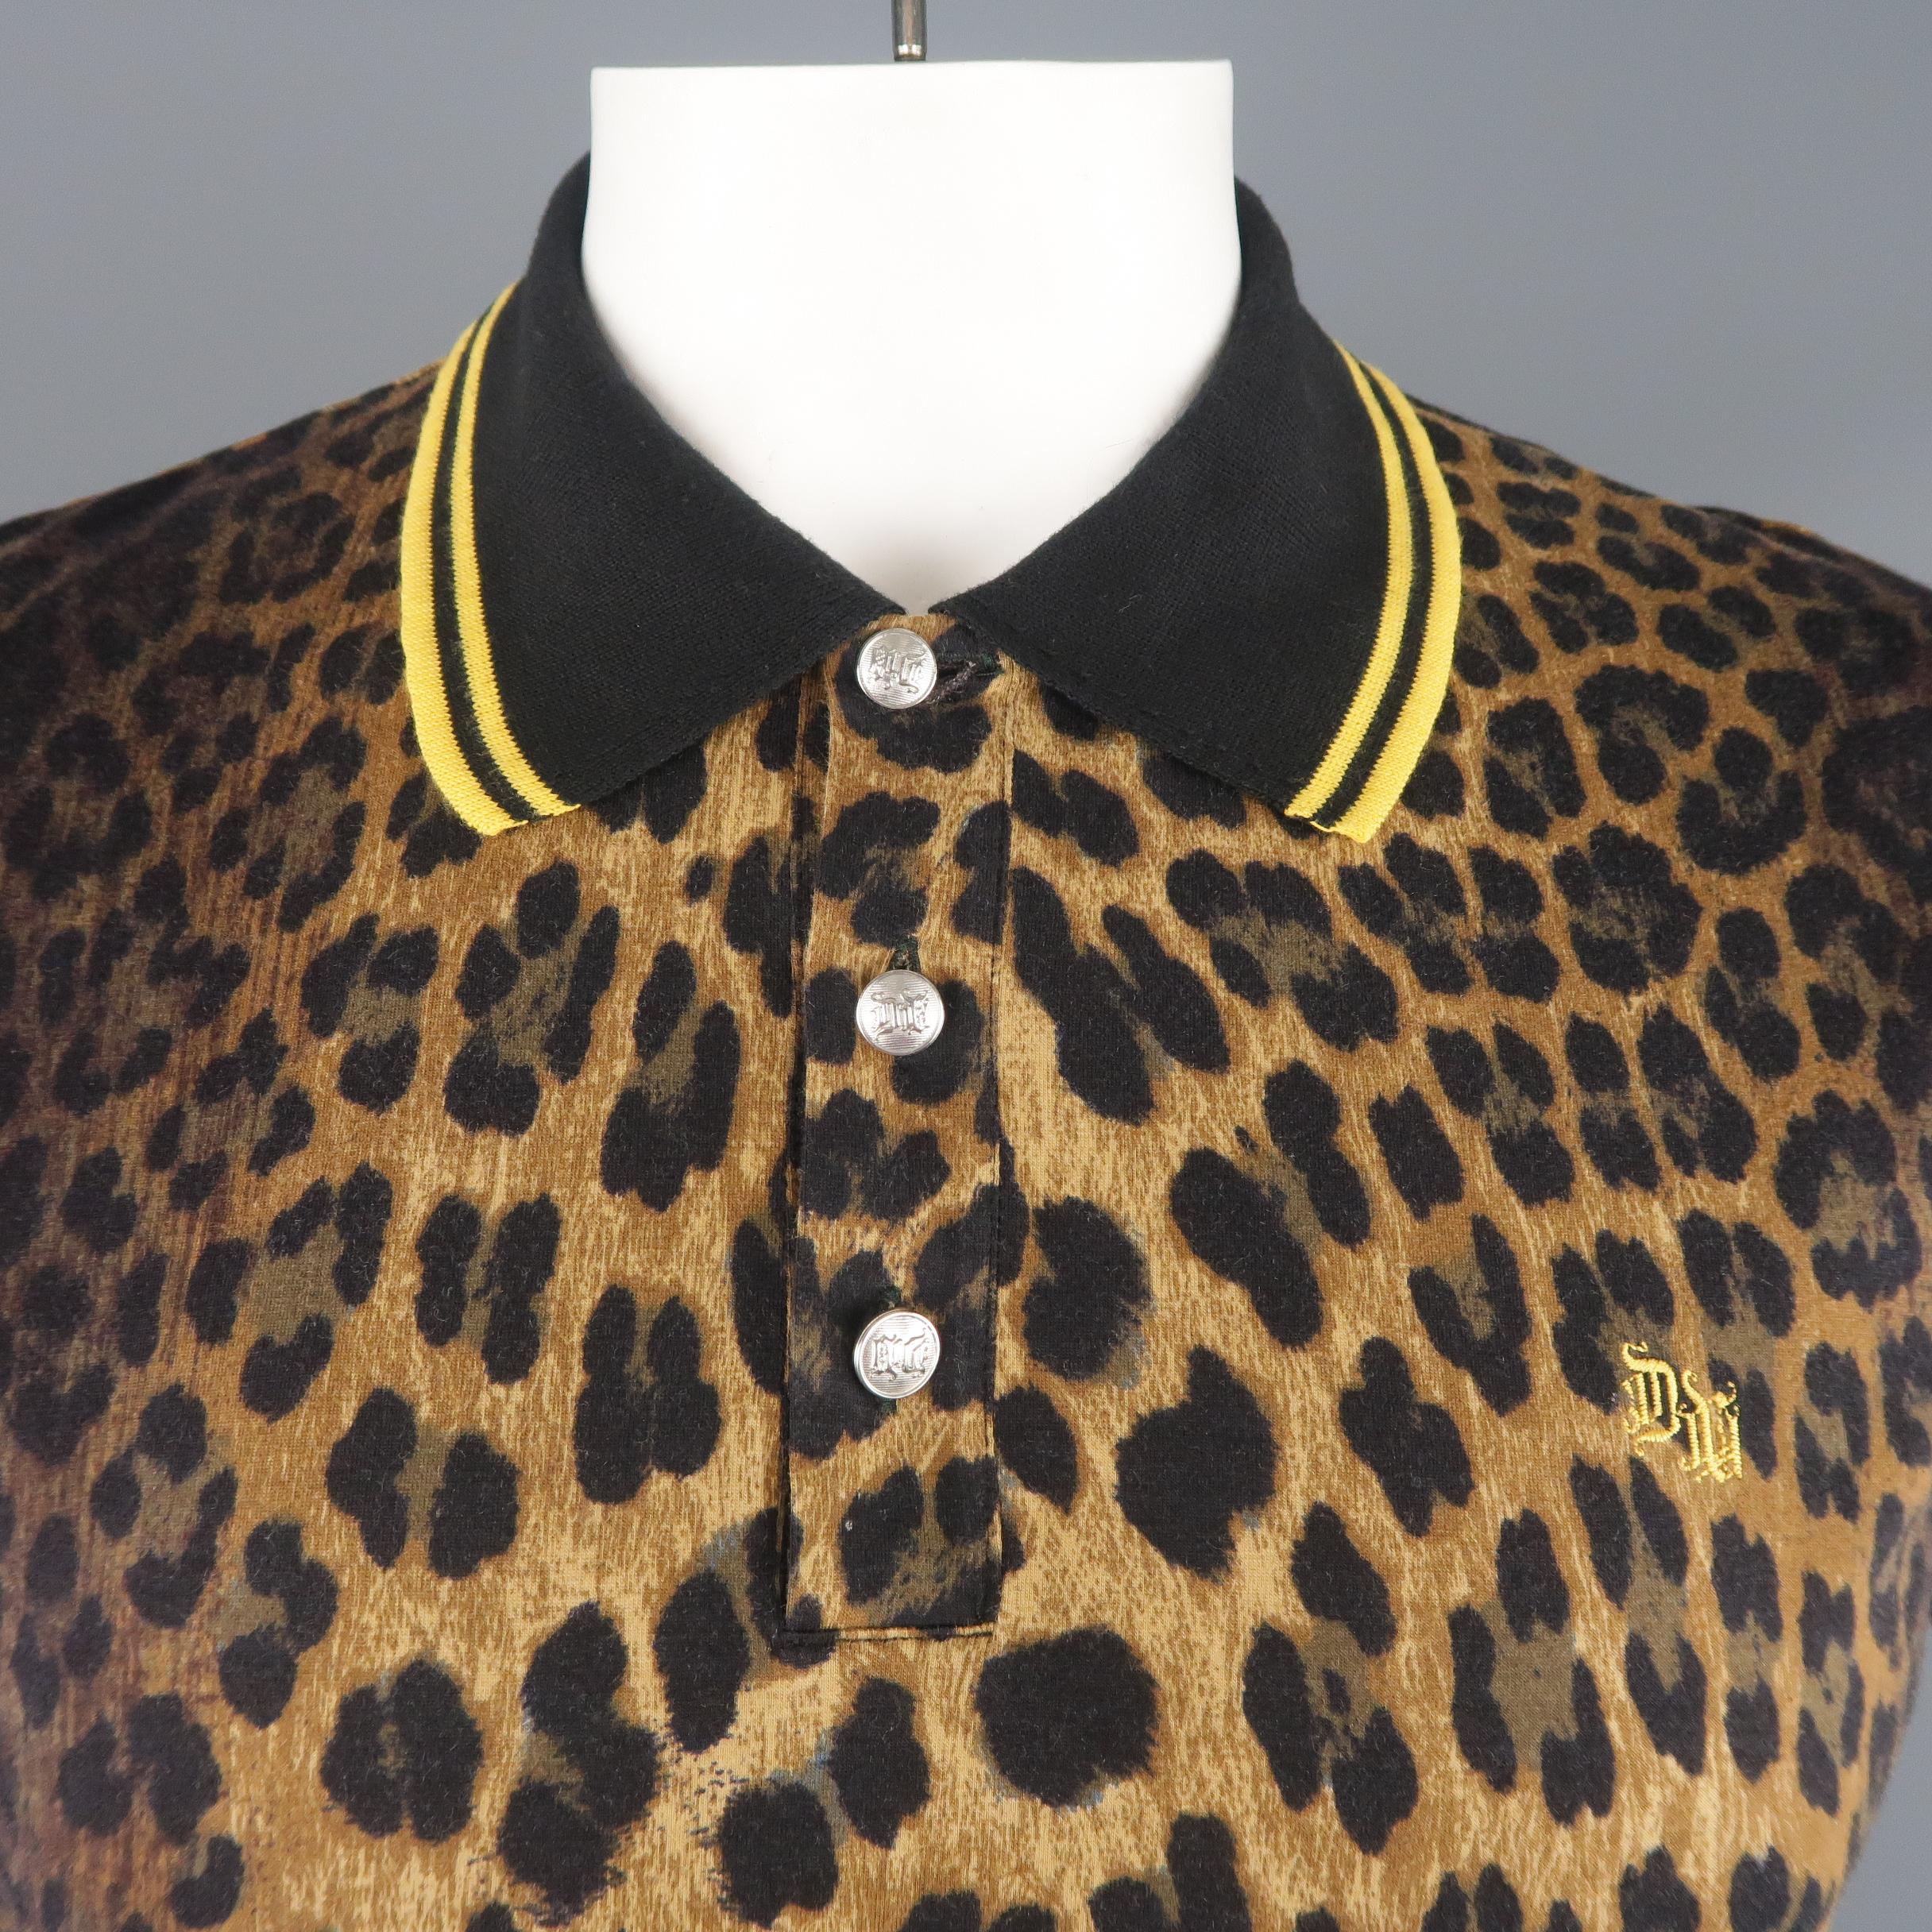 VERSACE polo shirt comes in brown leopard print jersey with a gold baroque print trim, silver tone engraved buttons, and black and yellow striped collar and trim. Made in Italy.
 
Excellent Pre-Owned Condition.
Marked: IT 56
 
Measurements:
